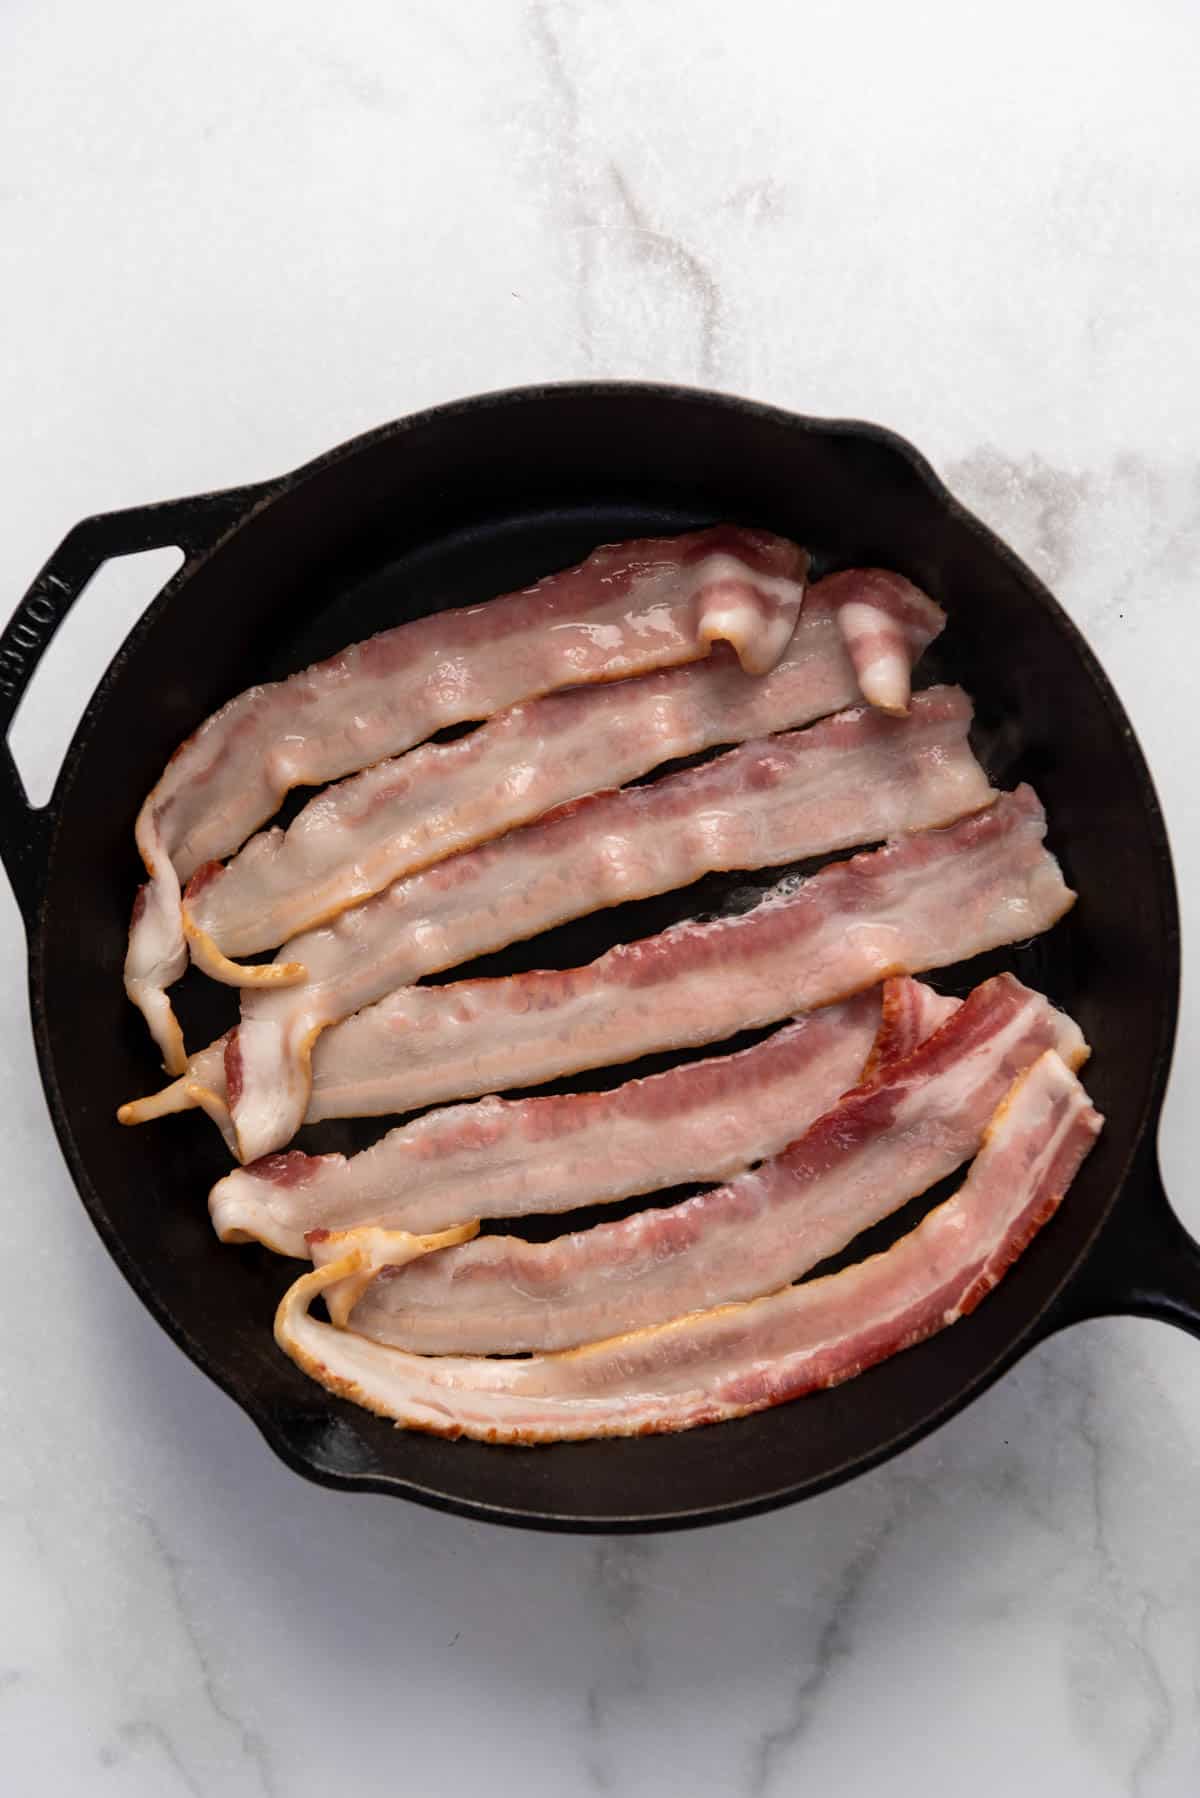 Frying bacon slices in a cast iron skillet.